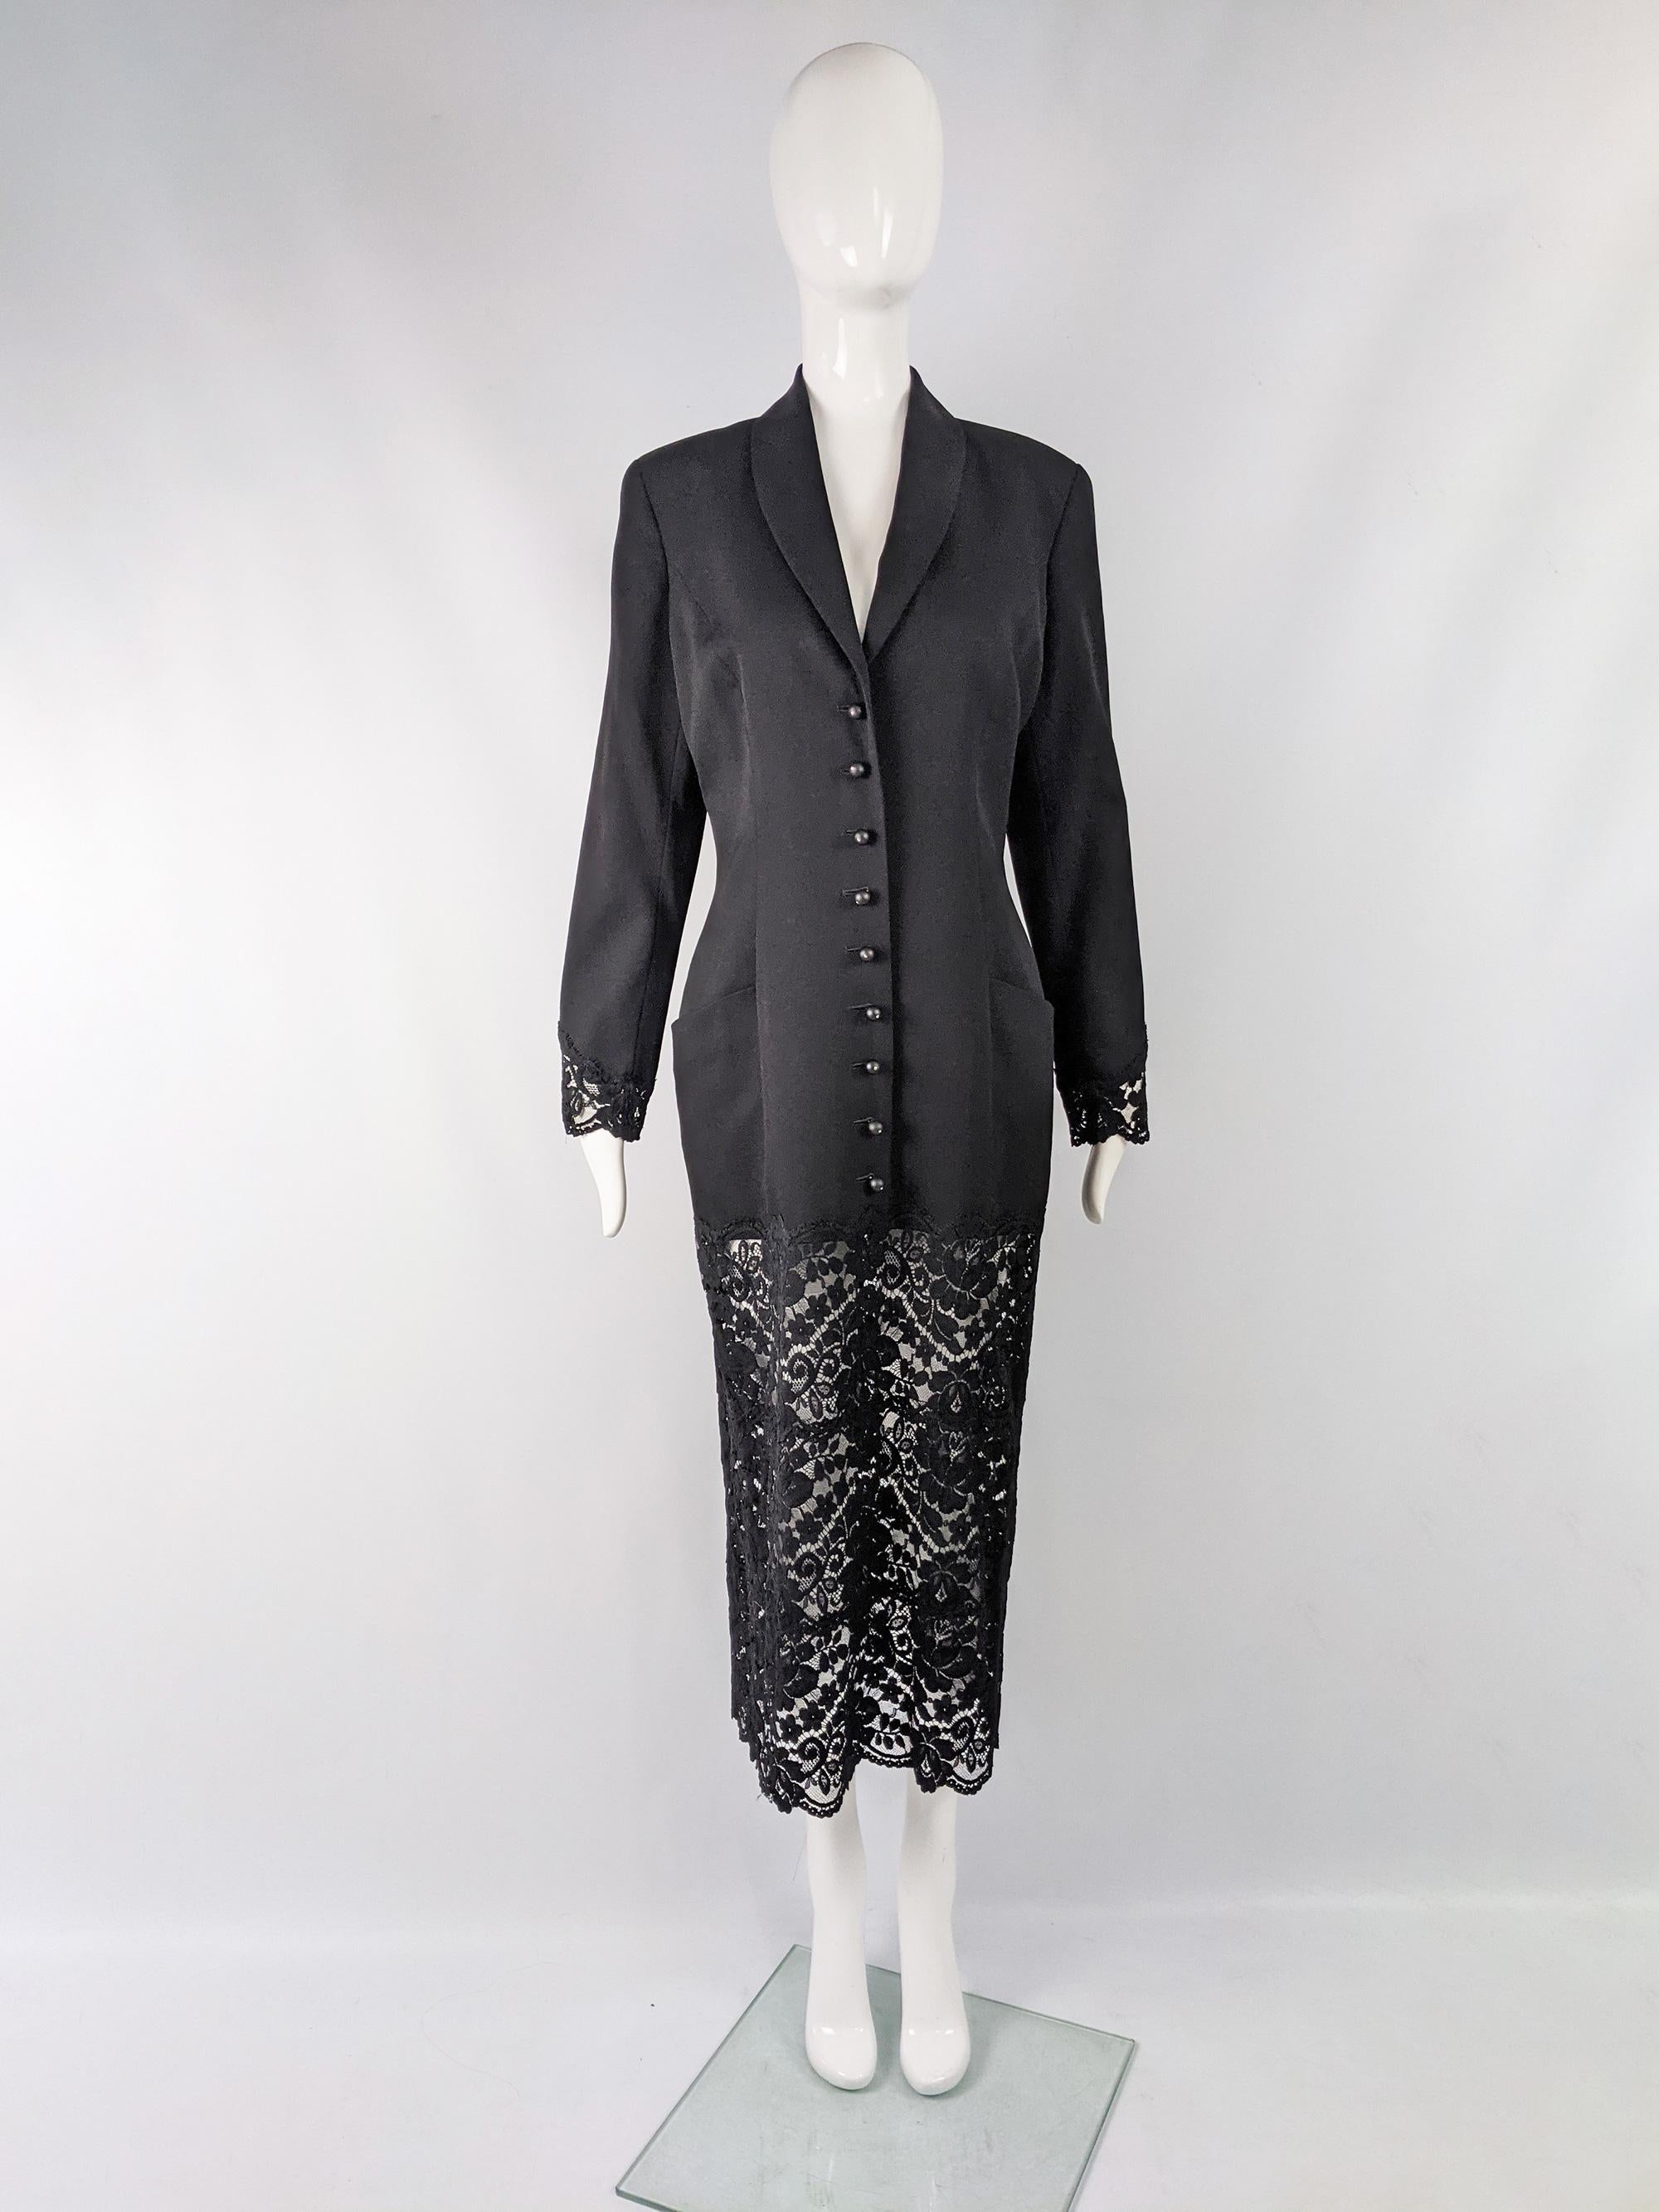 This 1980s vintage tuxedo style dress is by luxury French fashion designer, Chantal Thomass. It was made in France from a black worsted wool with long sleeves, a shawl collar and a long lace hem which gives a nod to her iconic lingerie.

Size: